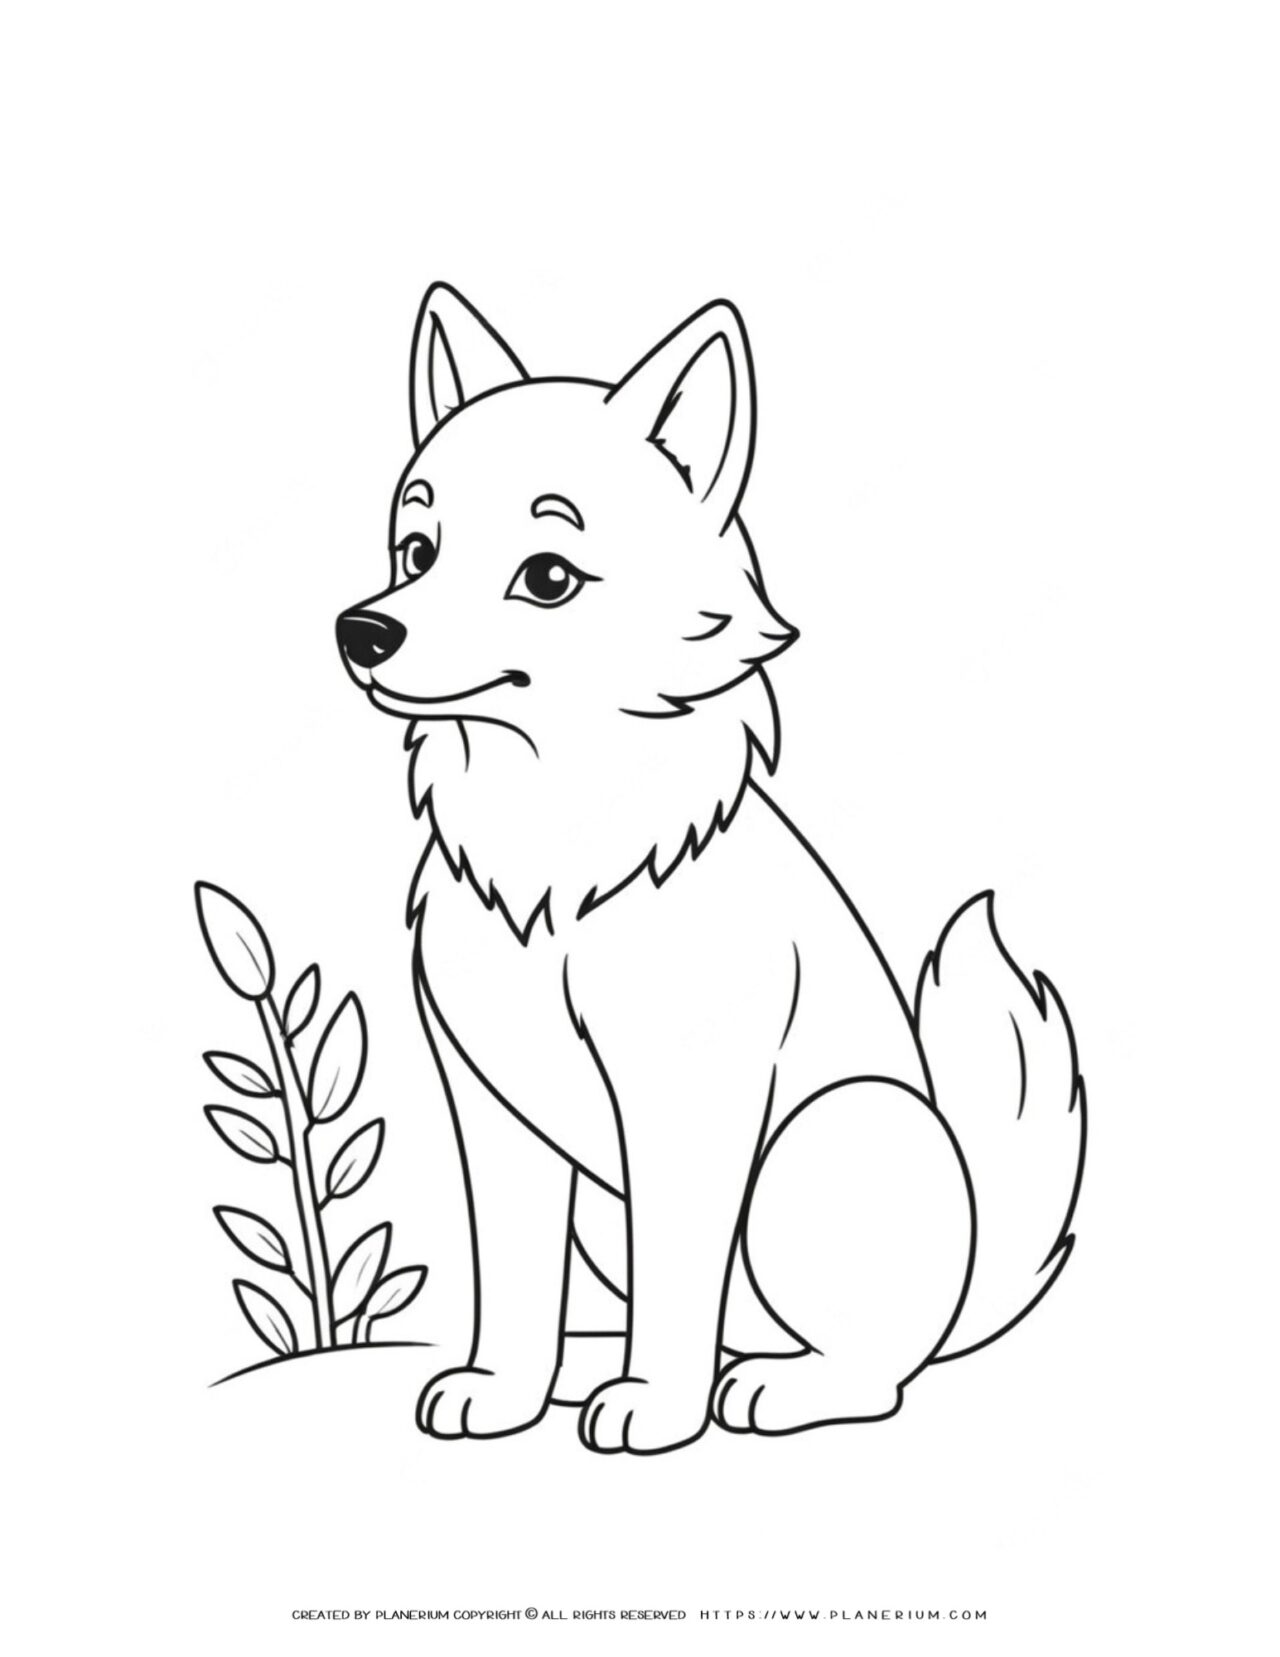 wolf-outline-side-view-animal-coloring-page-for-kids